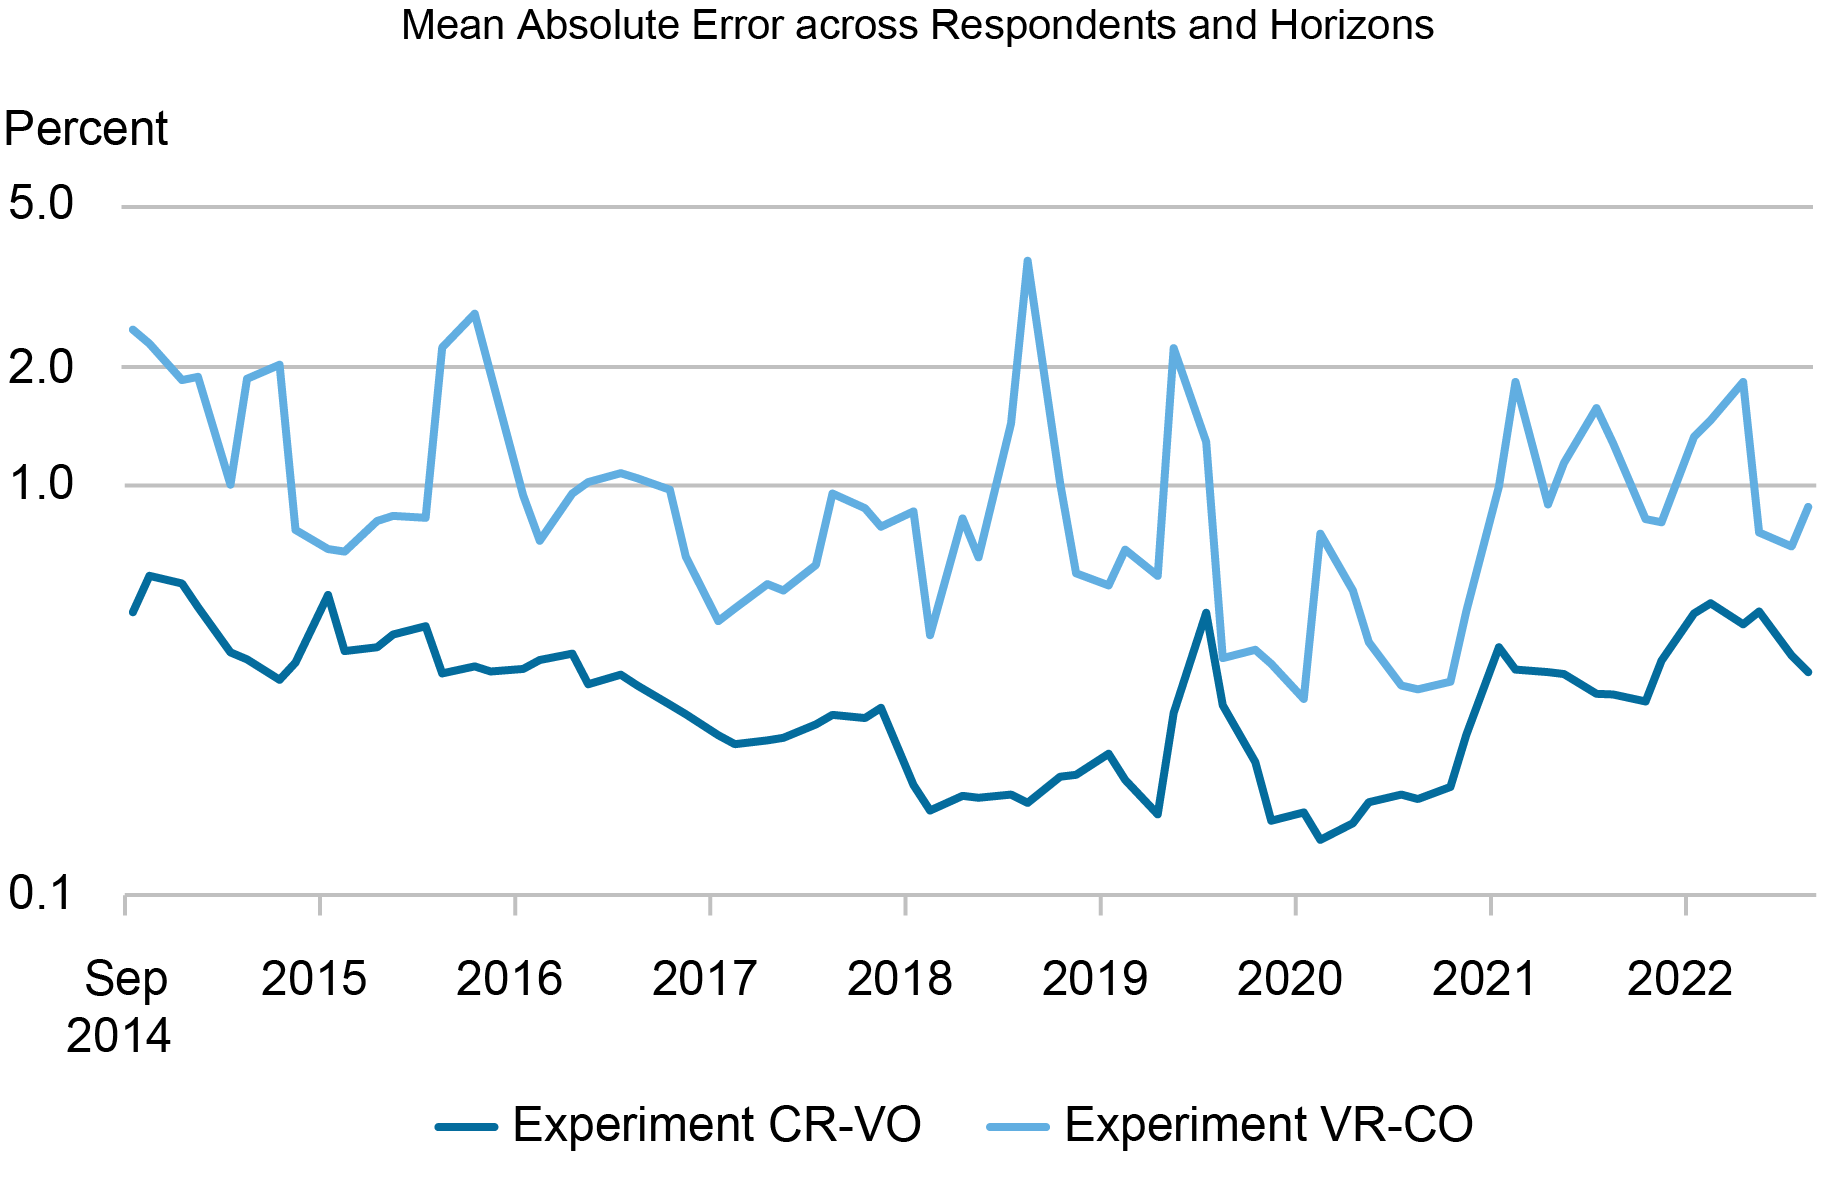 Liberty Street Economics line chart showing the mean absolute error of the common coefficients and varying outlooks experiment and the varying coefficients and common outlooks experiment, pooled across respondents and horizons, for each survey date. The y-axis is in logarithmic scale.